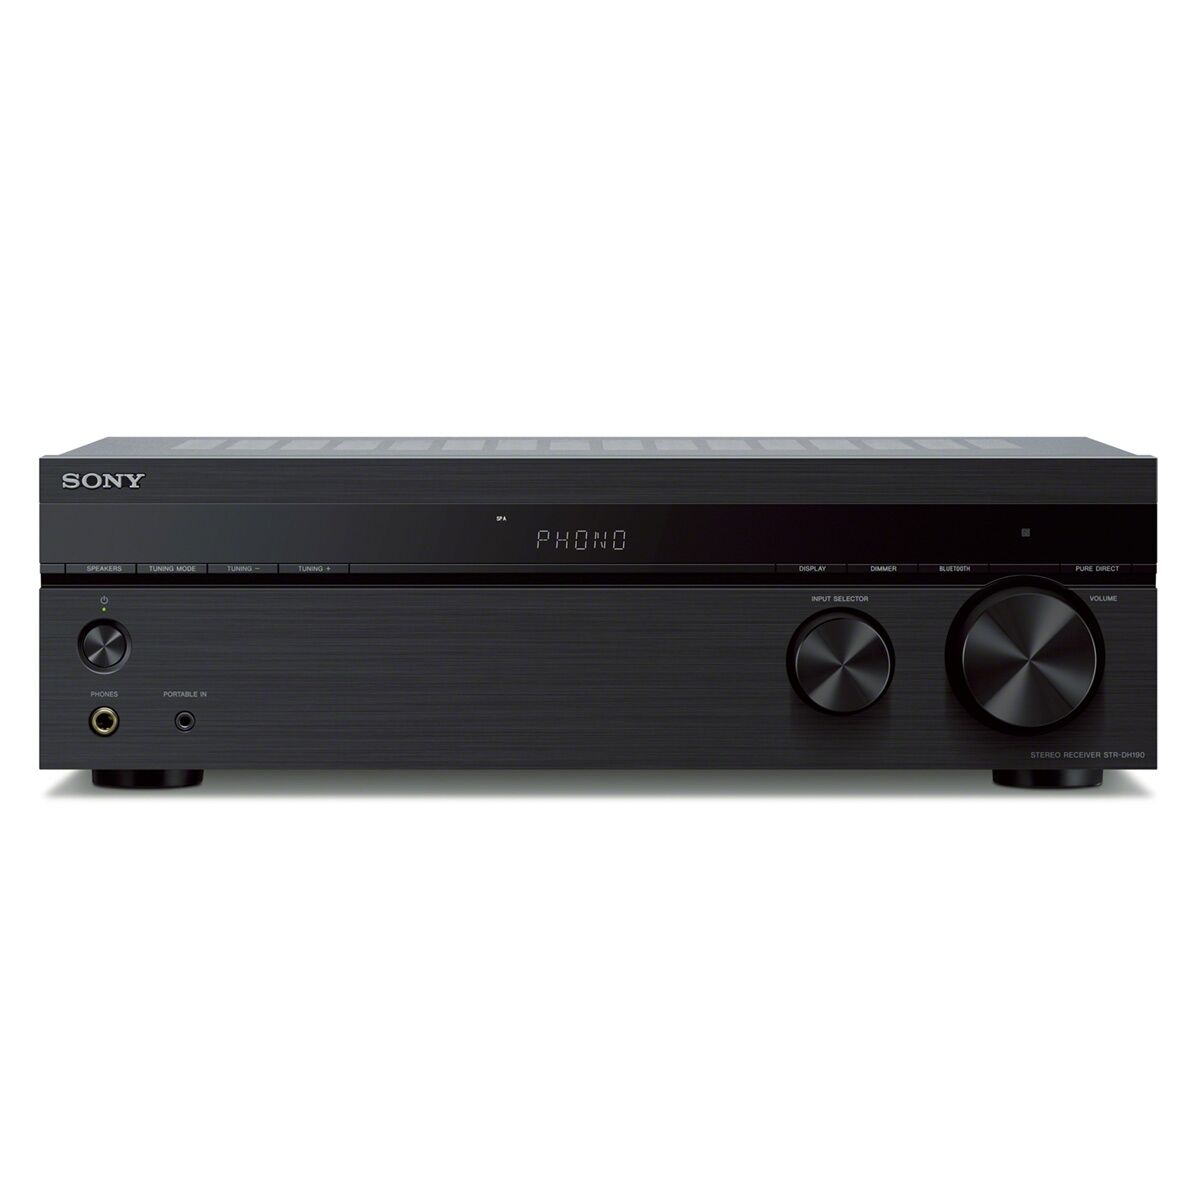 Sony Str-DH190 Stereo Receiver with Phono Input and Bluetooth Connectivity - Black